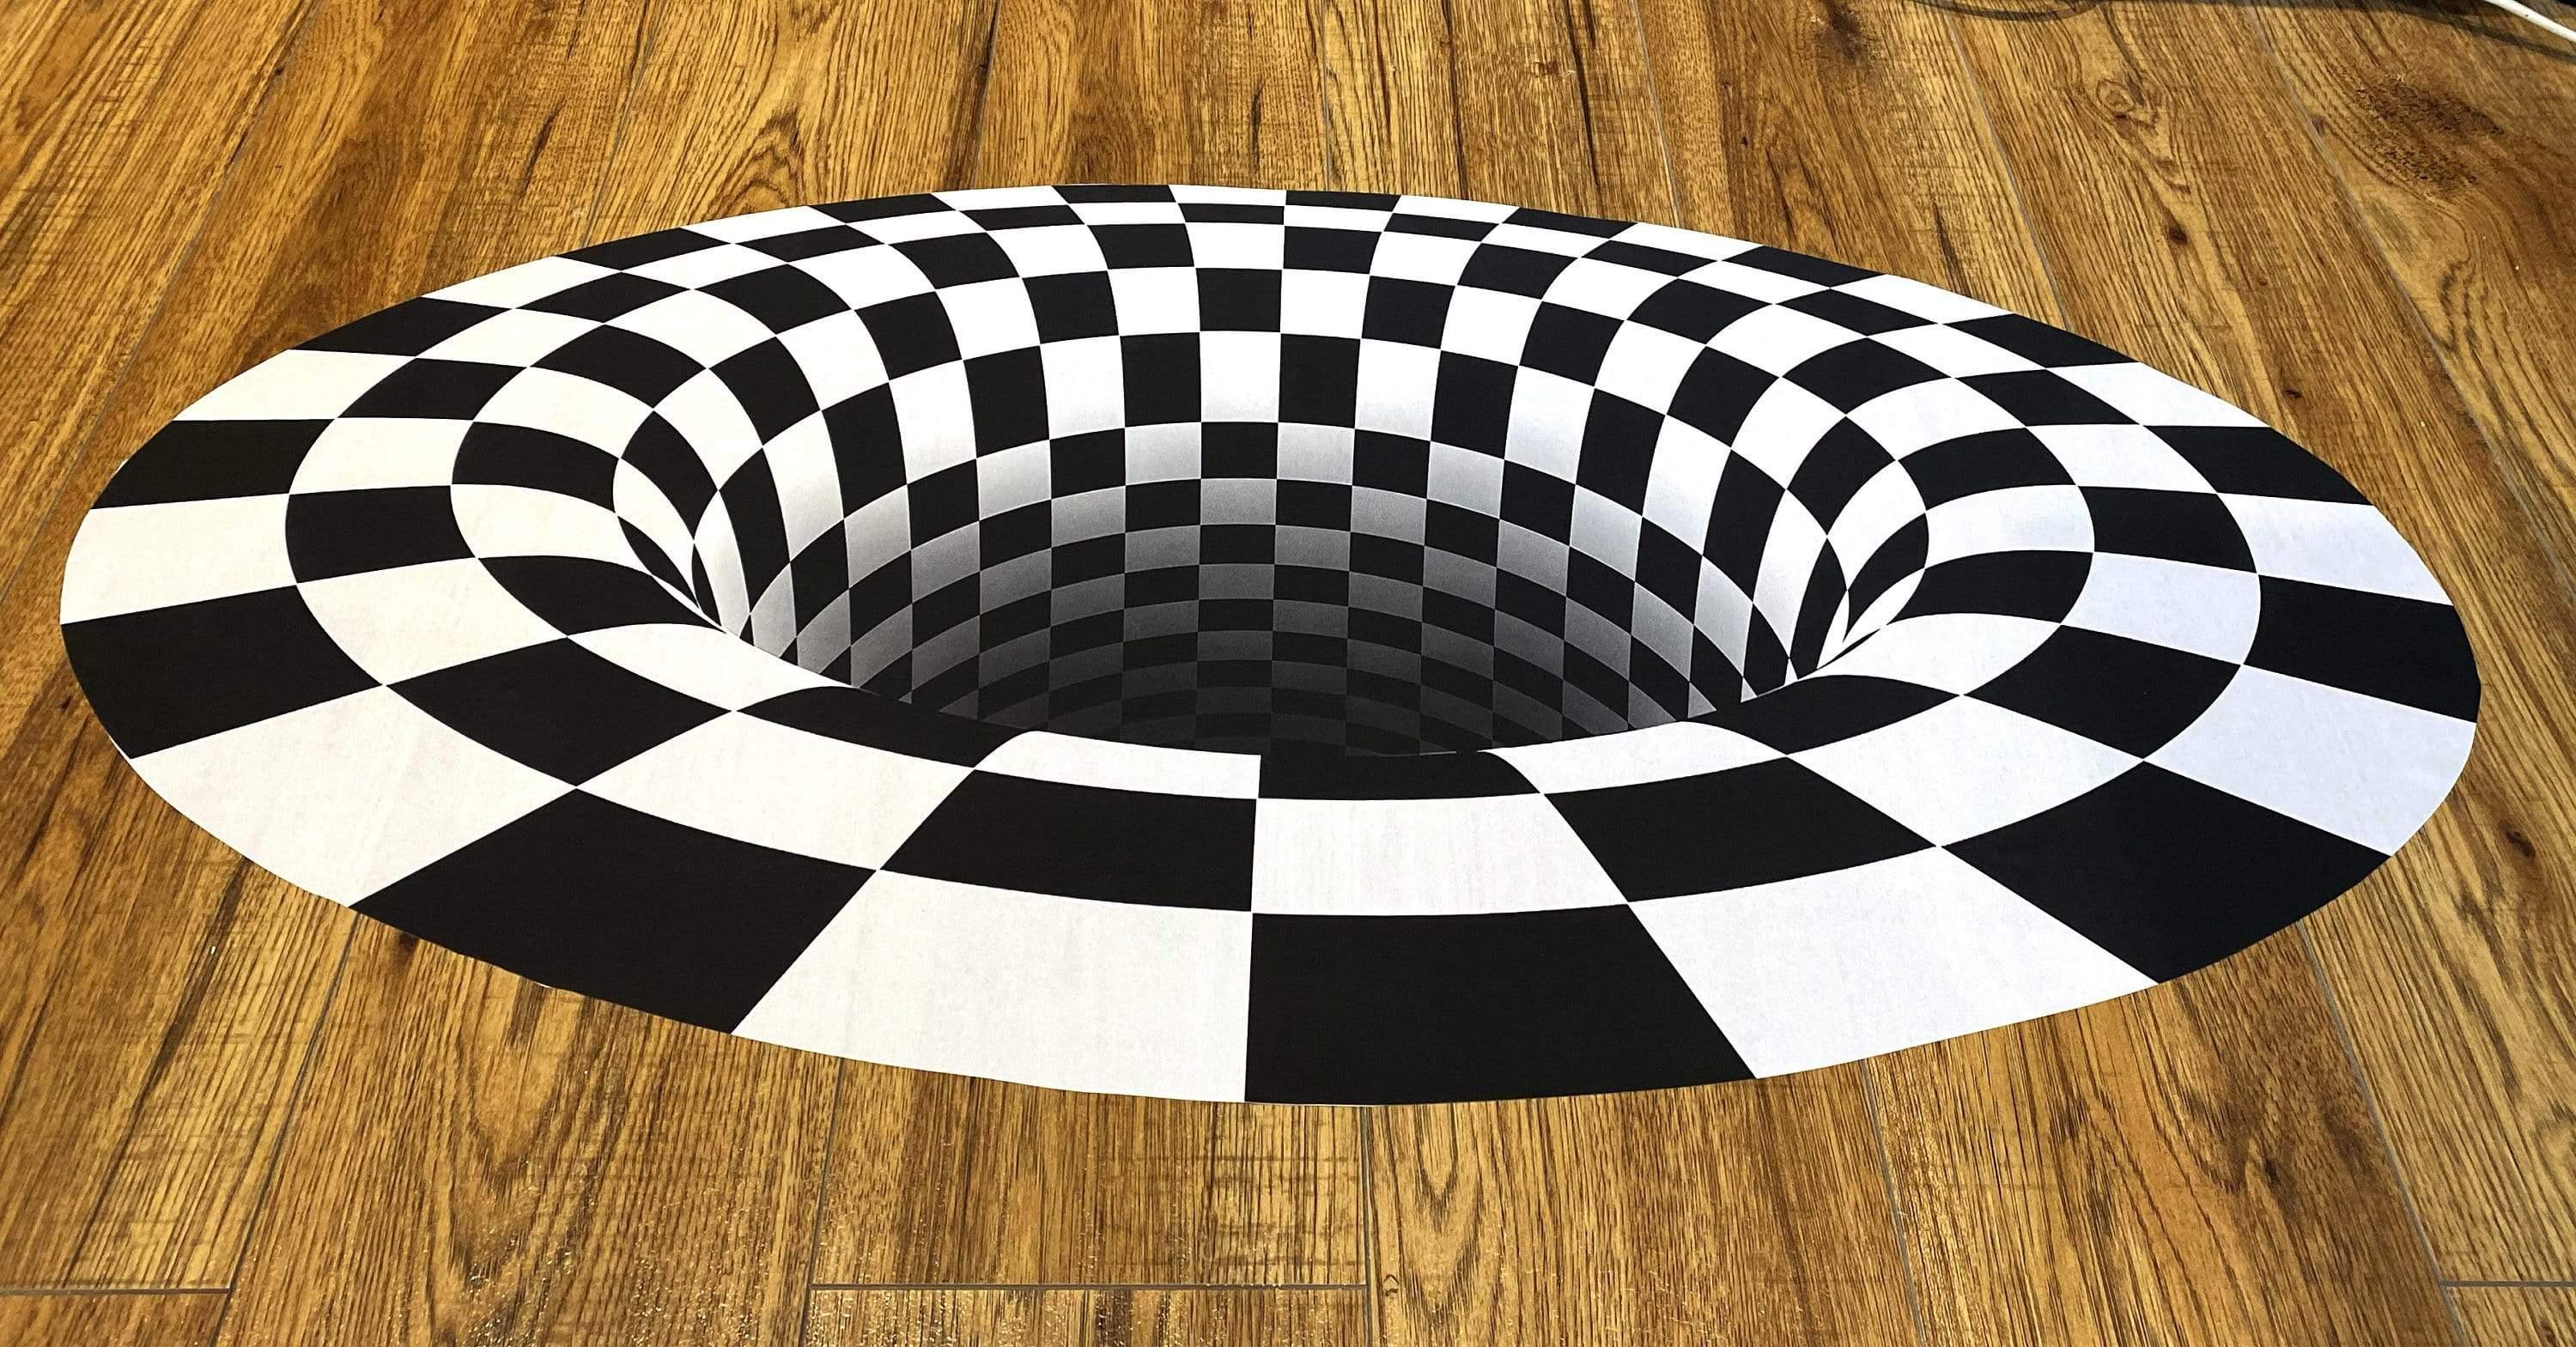 3D Floor Vortec Illusion printed on a durable fabric decal